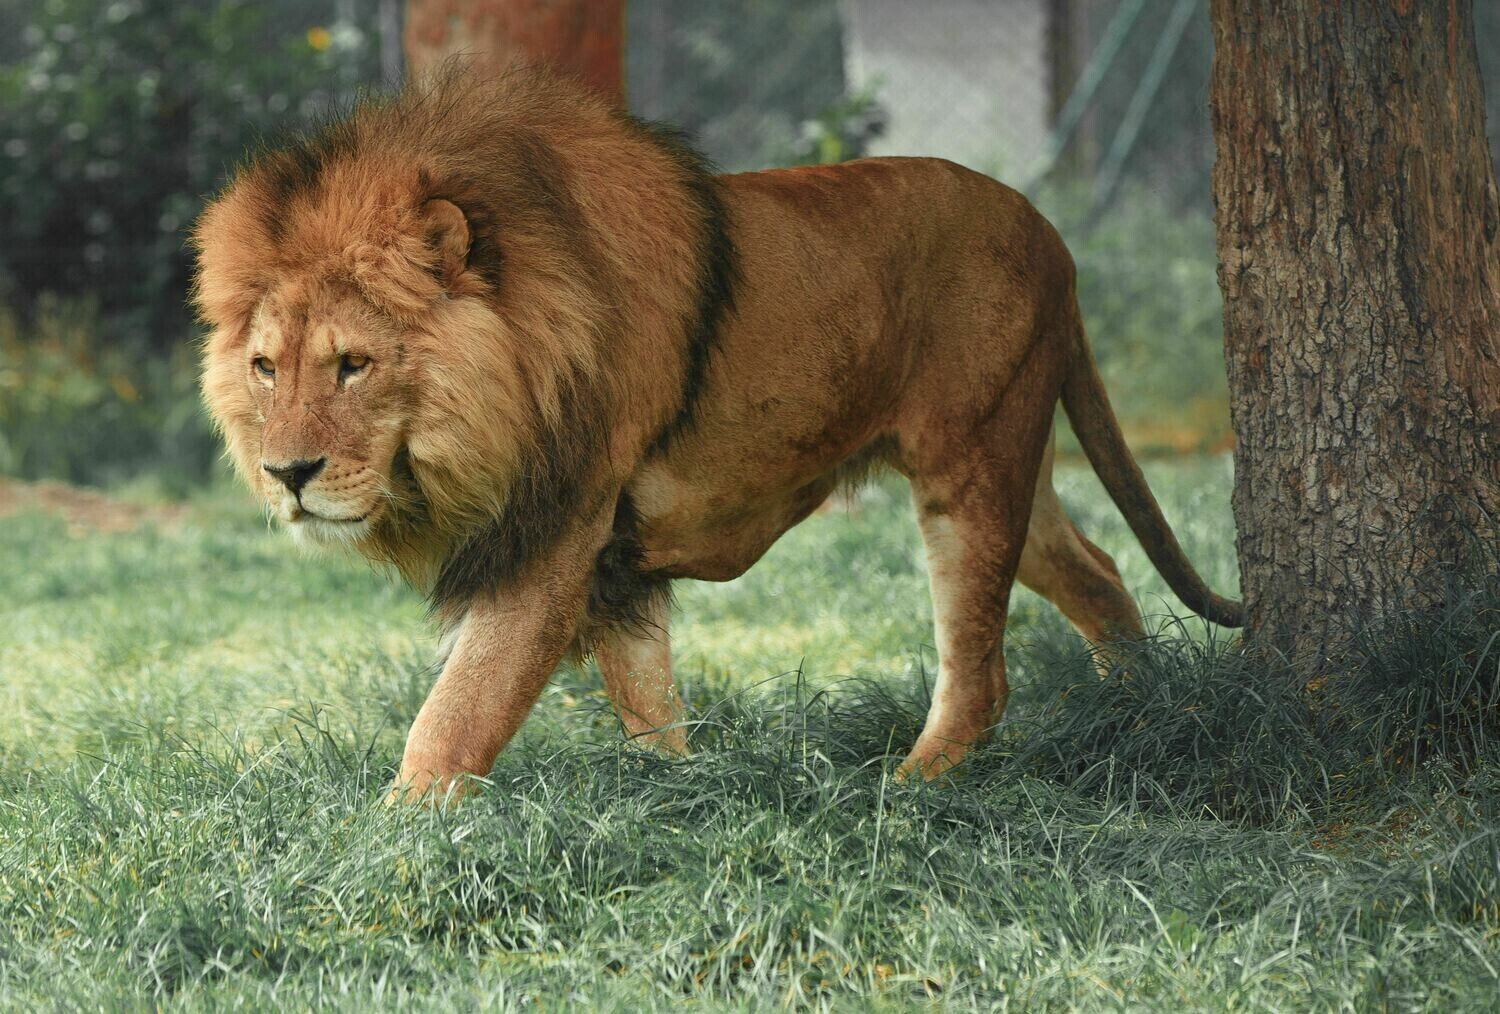 Stalking Lion - Specially ordered for you. Delivery is approximately 4 - 6 weeks.